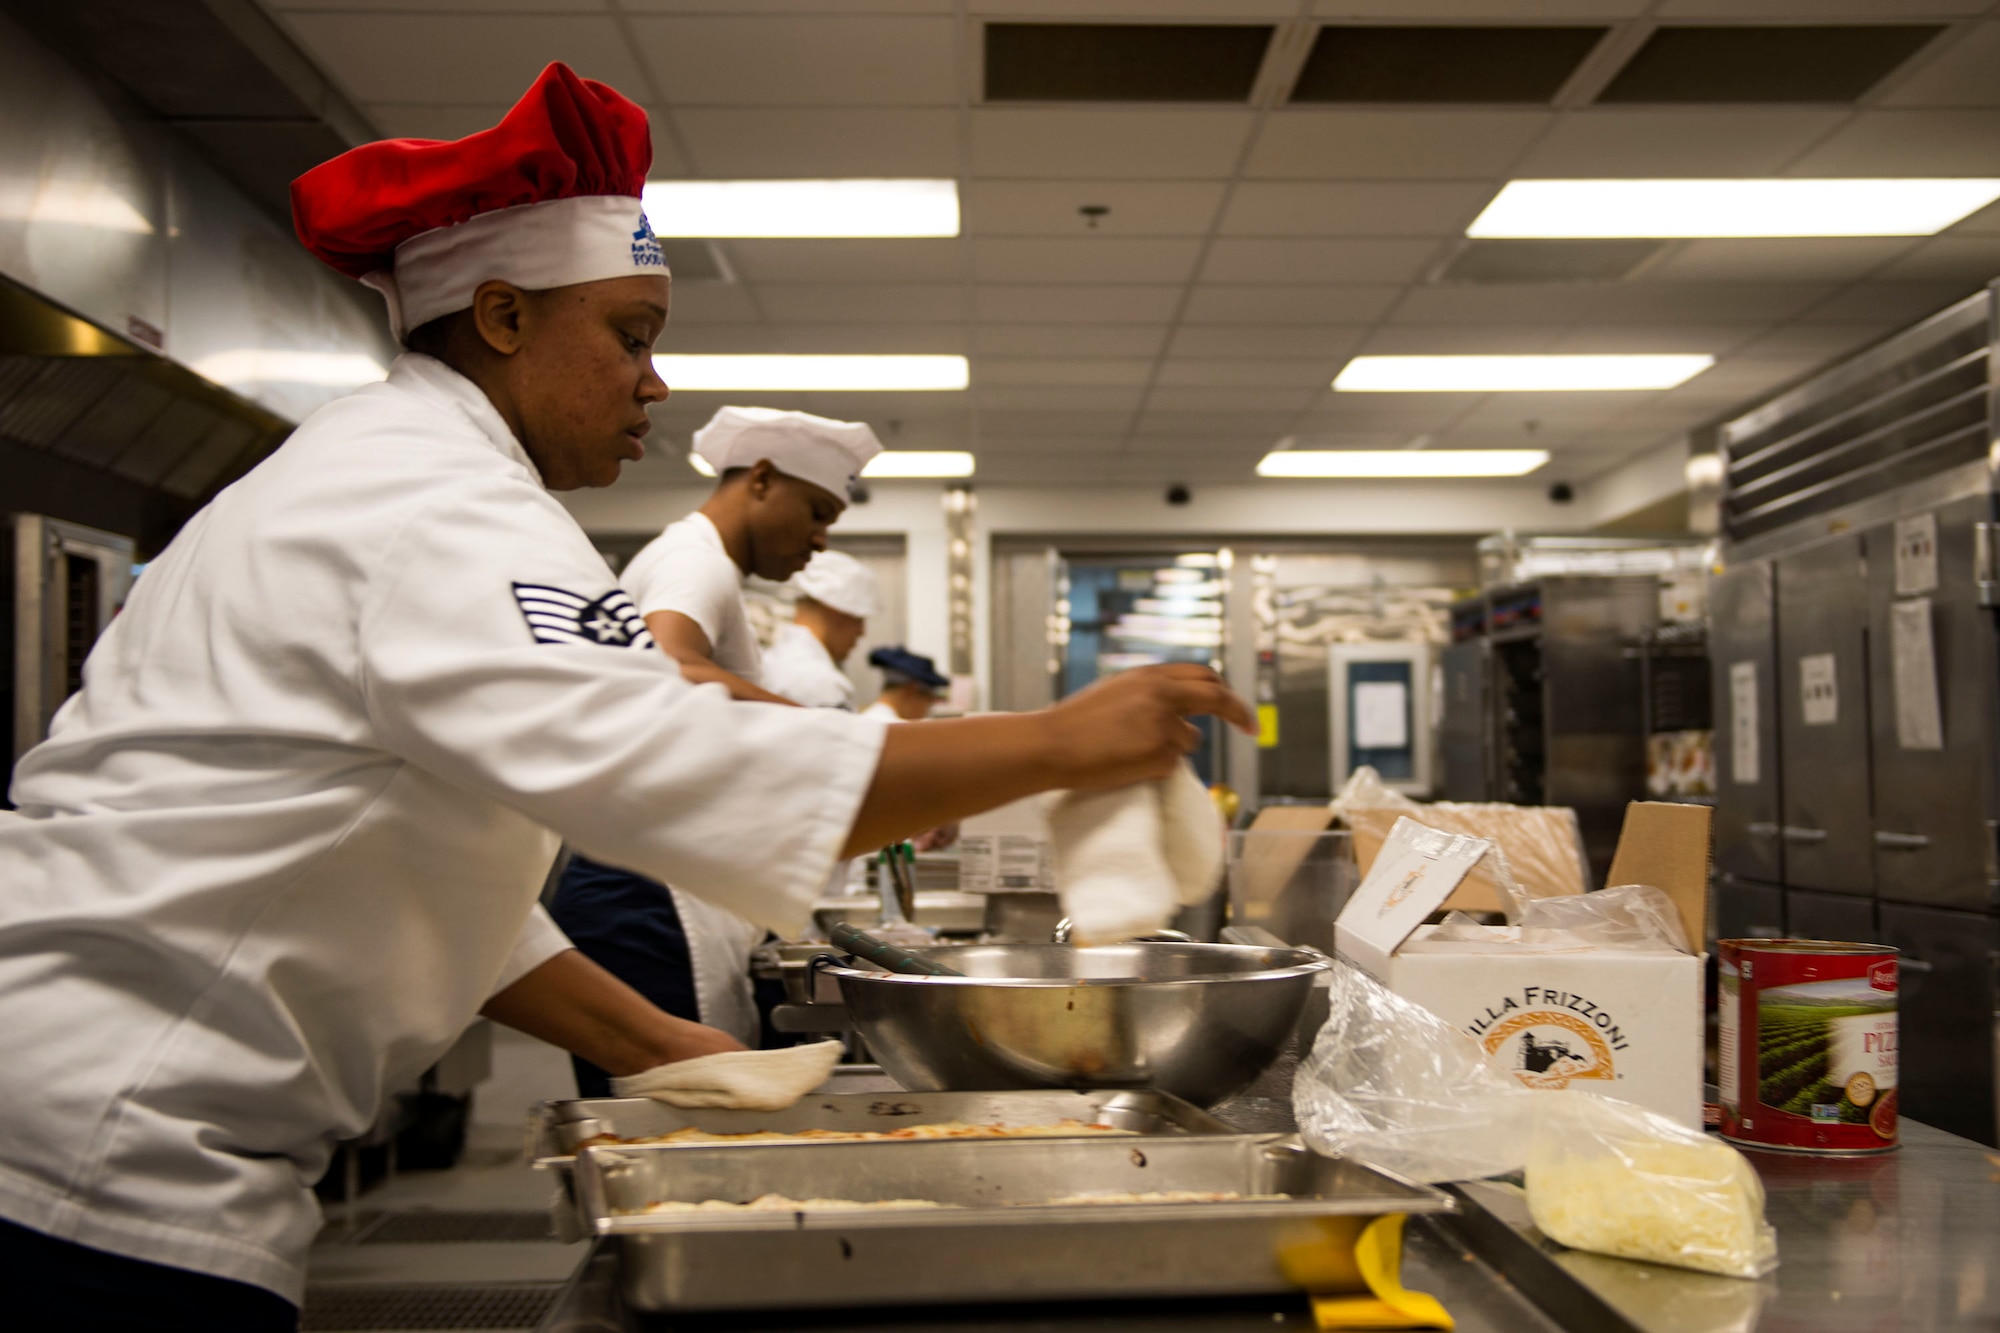 Airmen assigned to the 23d Force Support Squadron work together to get lunch ready in the Georgia Pines Dining Facility (DFAC), Dec. 12, 2017, at Moody Air Force Base, Ga. Through teamwork, adaption and striving for excellence, the Georgia Pines DFAC Airmen are able to ensure Team Moody is fed and ready to finish the fight. (U.S. Air Force Base photo by Airman 1st Class Erick Requadt)